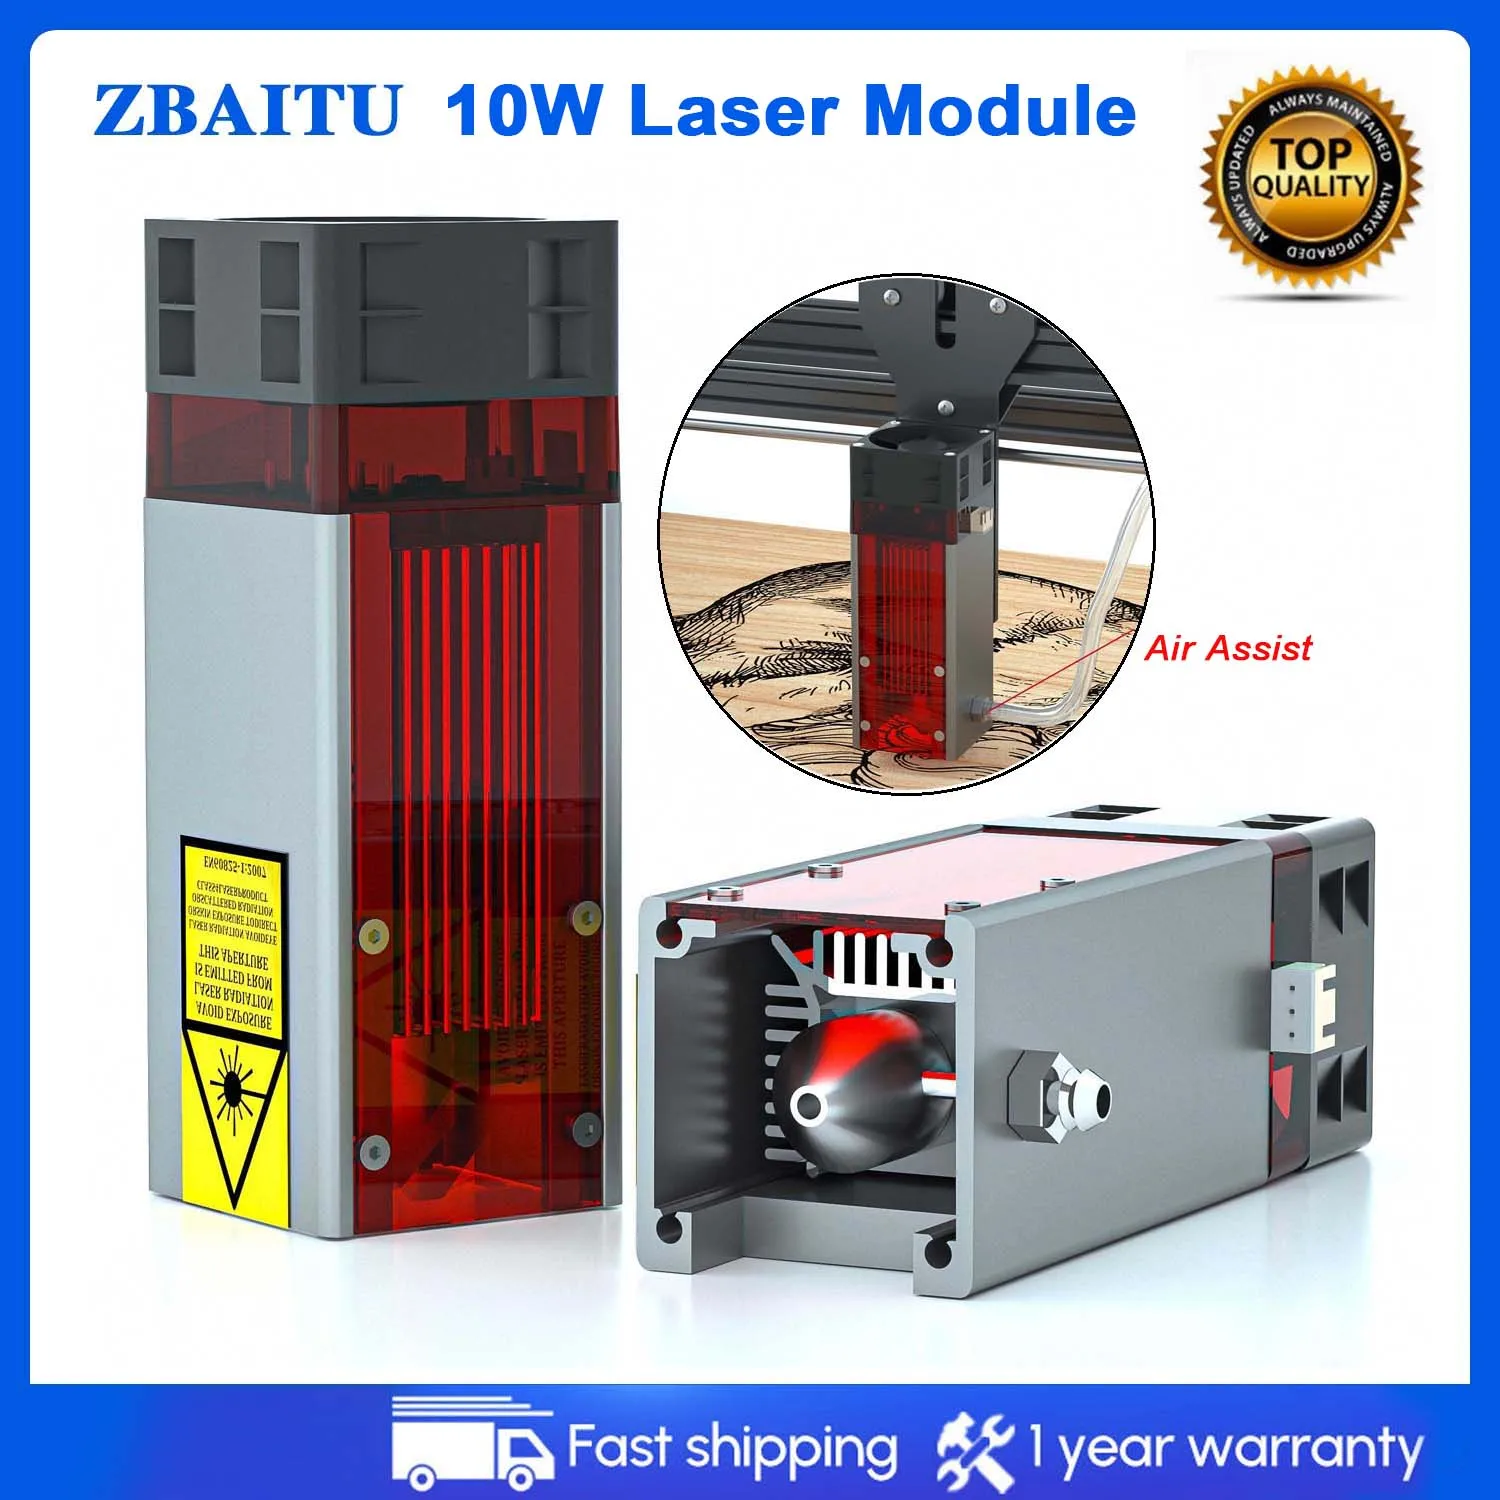 ZBAITU Laser Module Head with Air Assist 10W Optical Power 450nm for Engraving Marking Cutting Woodworking Machine CNC Router enlarge